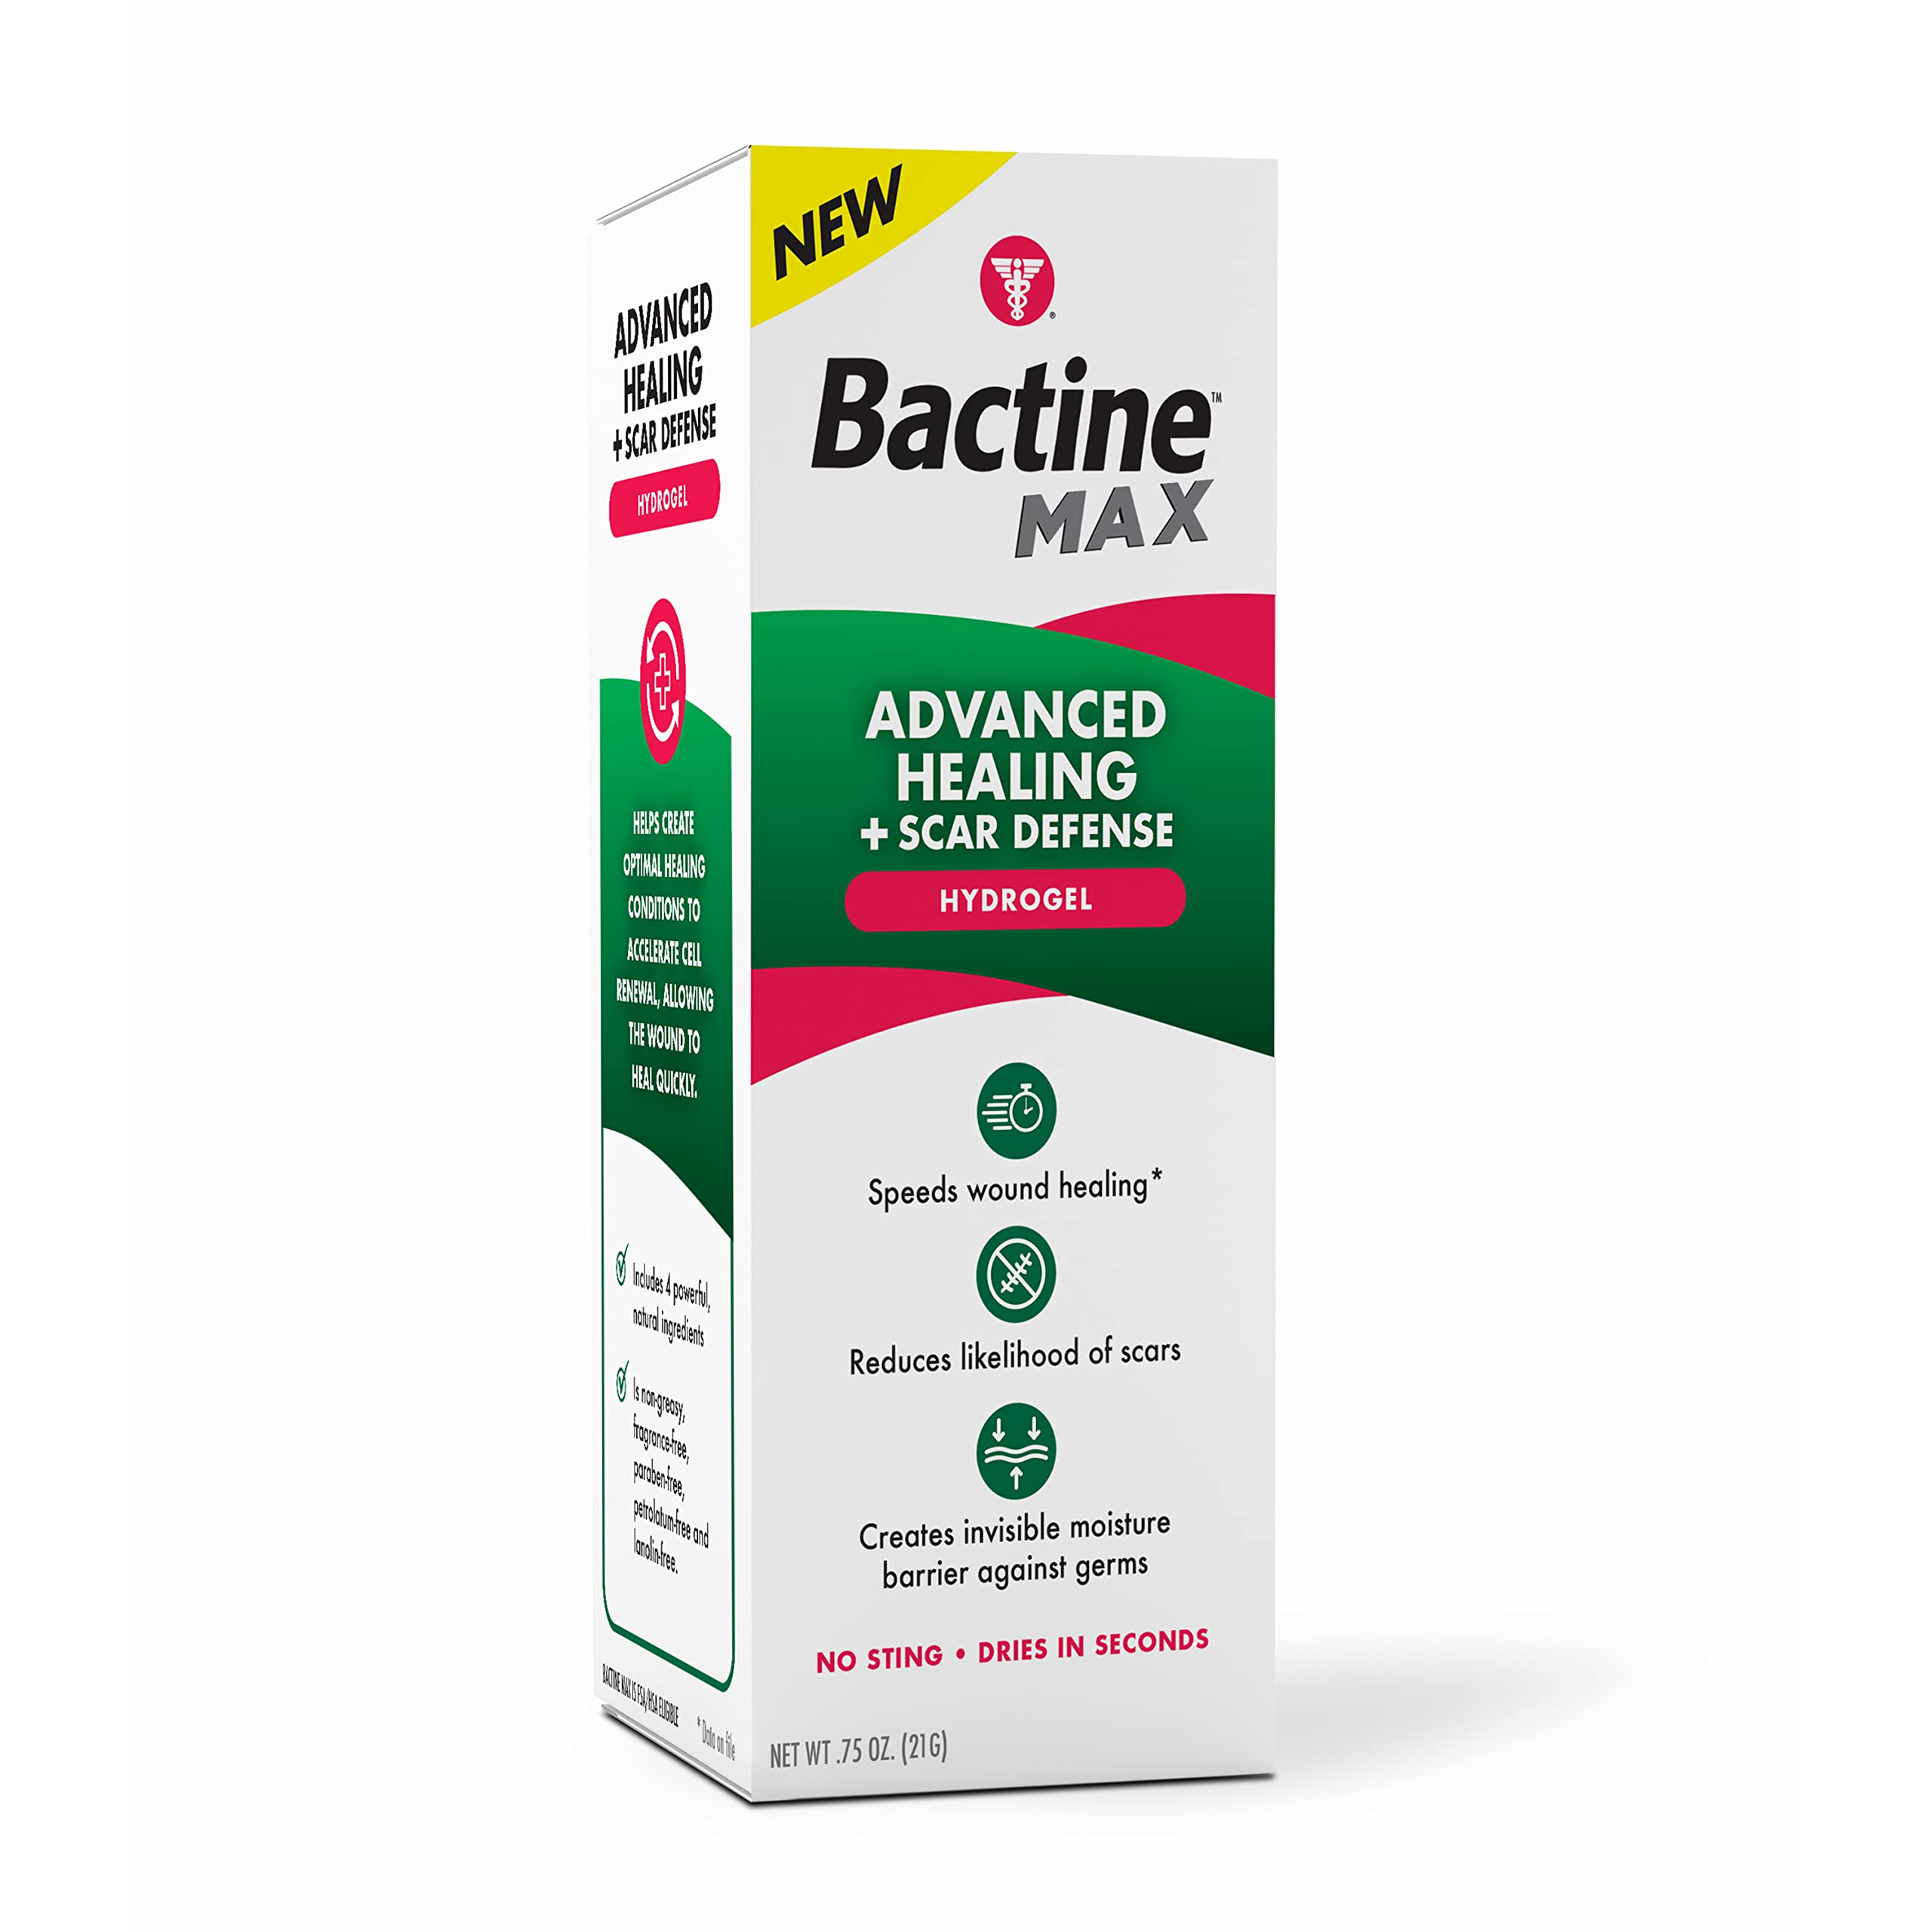 BACTINE MAX PAIN RELIEVING CLEANSING SPRAY | Shopee Philippines